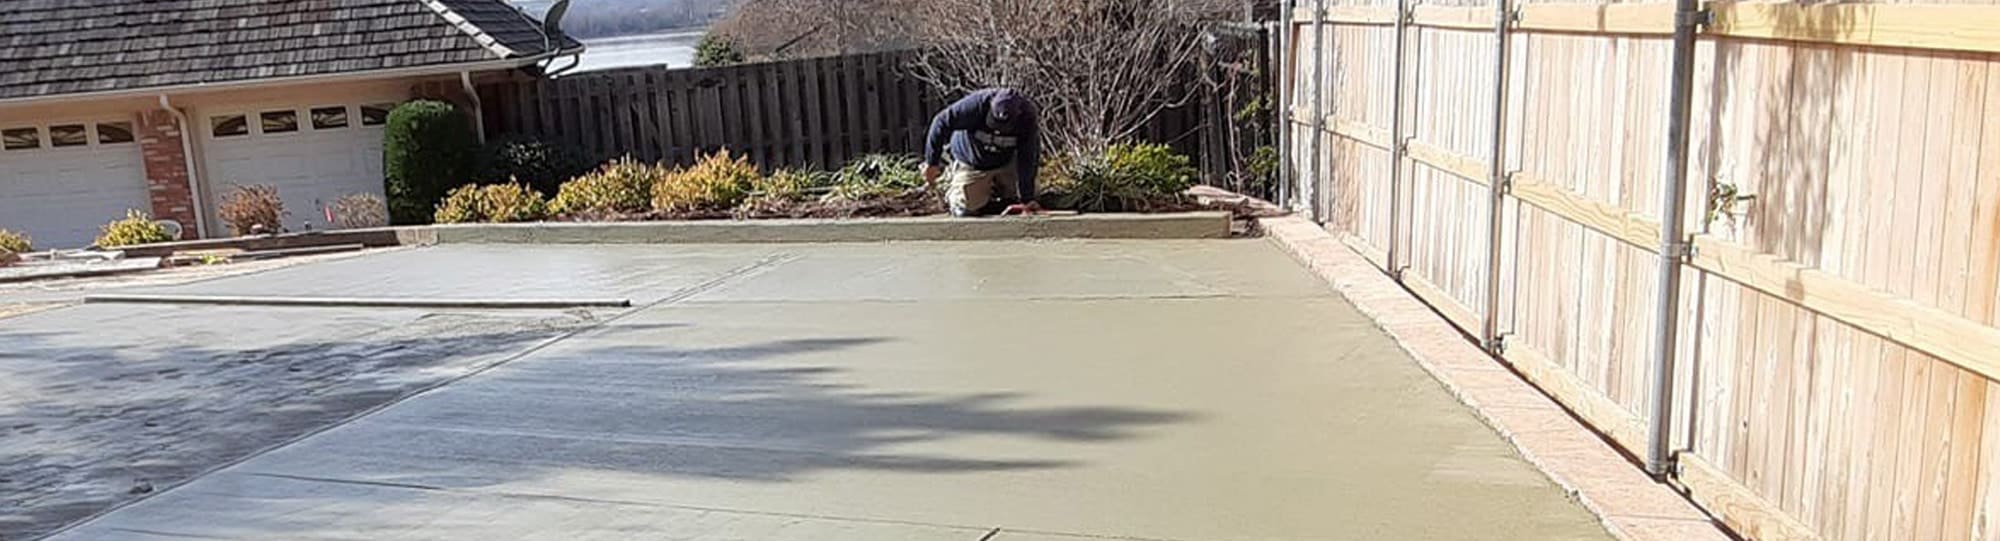 Residential Concrete Driveway Installed in Arlington, TX